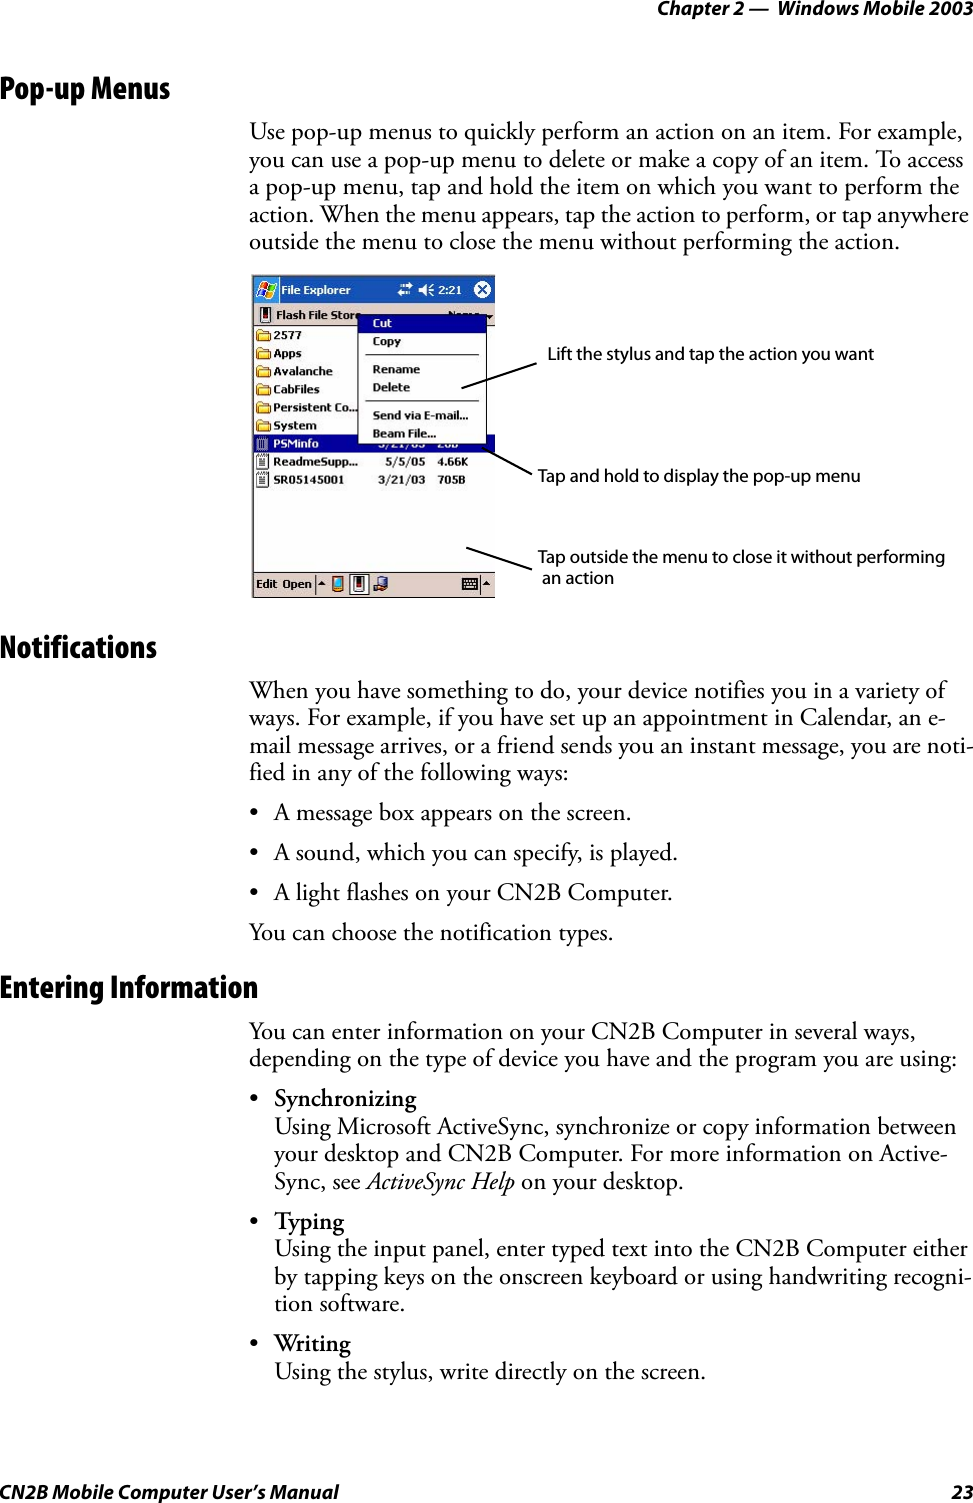 Chapter 2 —  Windows Mobile 2003CN2B Mobile Computer User’s Manual 23Pop-up MenusUse pop-up menus to quickly perform an action on an item. For example, you can use a pop-up menu to delete or make a copy of an item. To access a pop-up menu, tap and hold the item on which you want to perform the action. When the menu appears, tap the action to perform, or tap anywhere outside the menu to close the menu without performing the action.NotificationsWhen you have something to do, your device notifies you in a variety of ways. For example, if you have set up an appointment in Calendar, an e-mail message arrives, or a friend sends you an instant message, you are noti-fied in any of the following ways:• A message box appears on the screen.• A sound, which you can specify, is played.• A light flashes on your CN2B Computer.You can choose the notification types.Entering InformationYou can enter information on your CN2B Computer in several ways, depending on the type of device you have and the program you are using:•SynchronizingUsing Microsoft ActiveSync, synchronize or copy information between your desktop and CN2B Computer. For more information on Active-Sync, see ActiveSync Help on your desktop.•TypingUsing the input panel, enter typed text into the CN2B Computer either by tapping keys on the onscreen keyboard or using handwriting recogni-tion software.•WritingUsing the stylus, write directly on the screen.Tap and hold to display the pop-up menuLift the stylus and tap the action you wantTap outside the menu to close it without performing an action